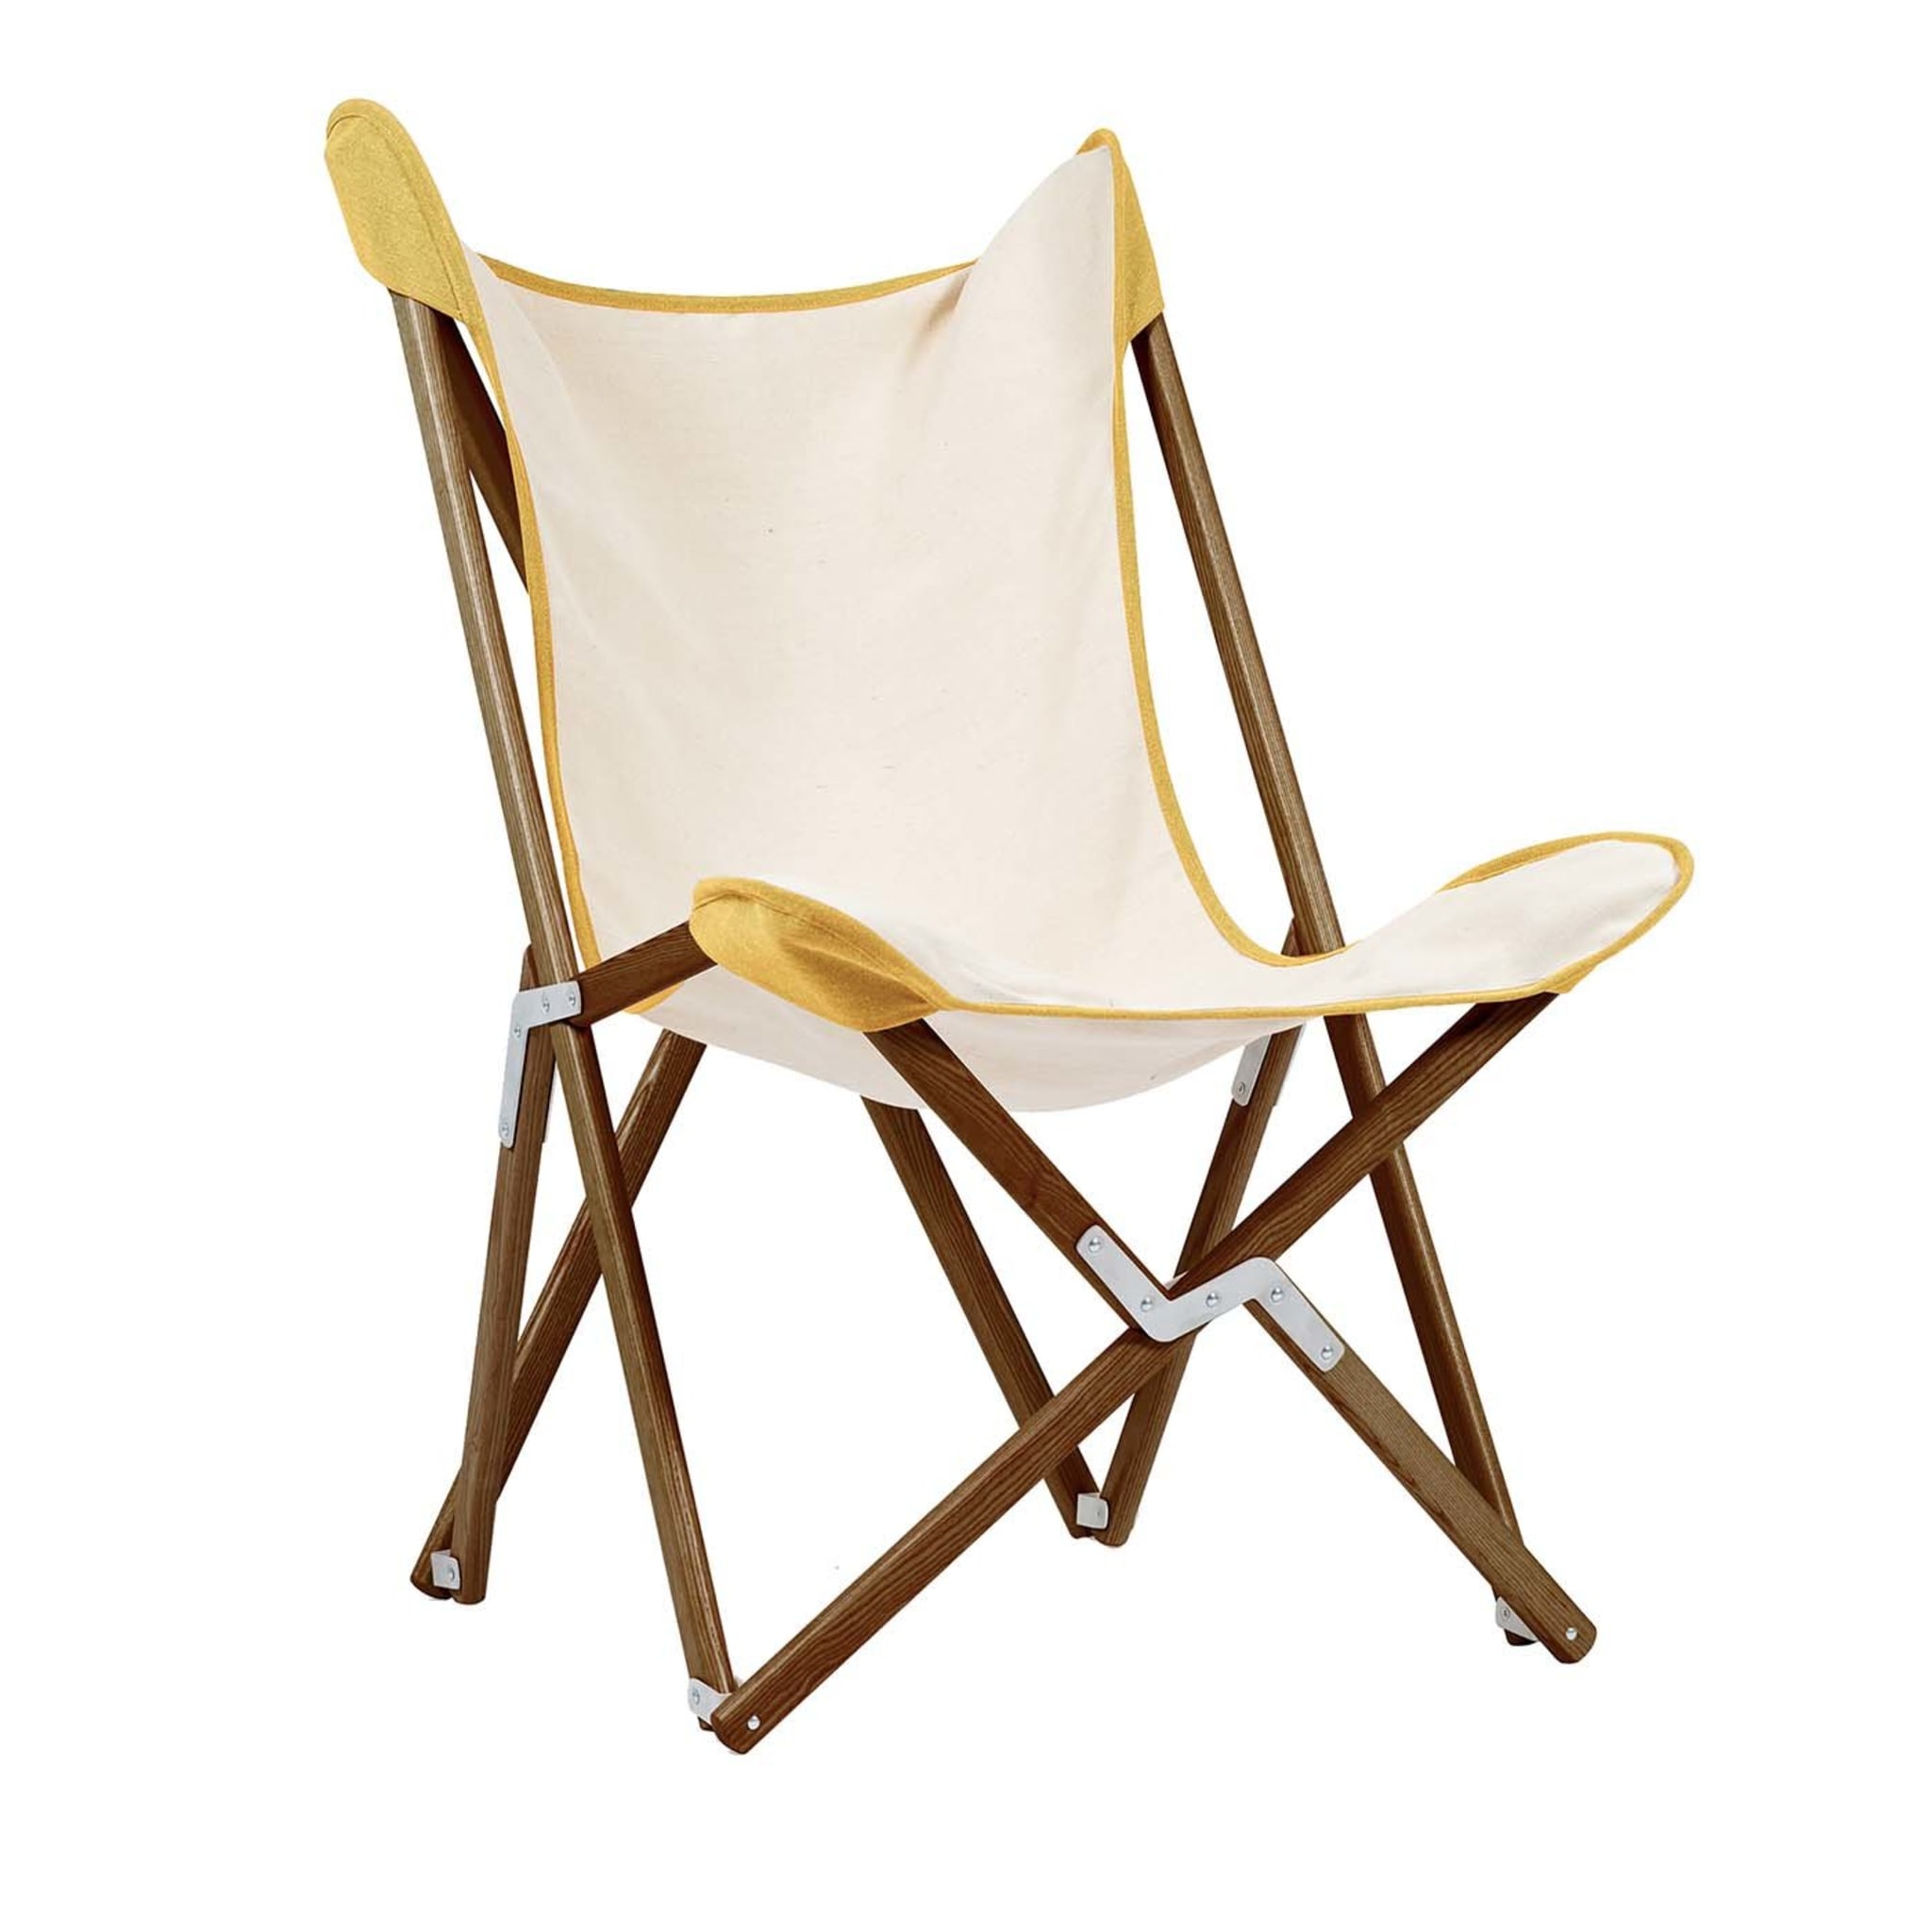 Tripolina Armchair in Cream and Mustard Yellow - Main view